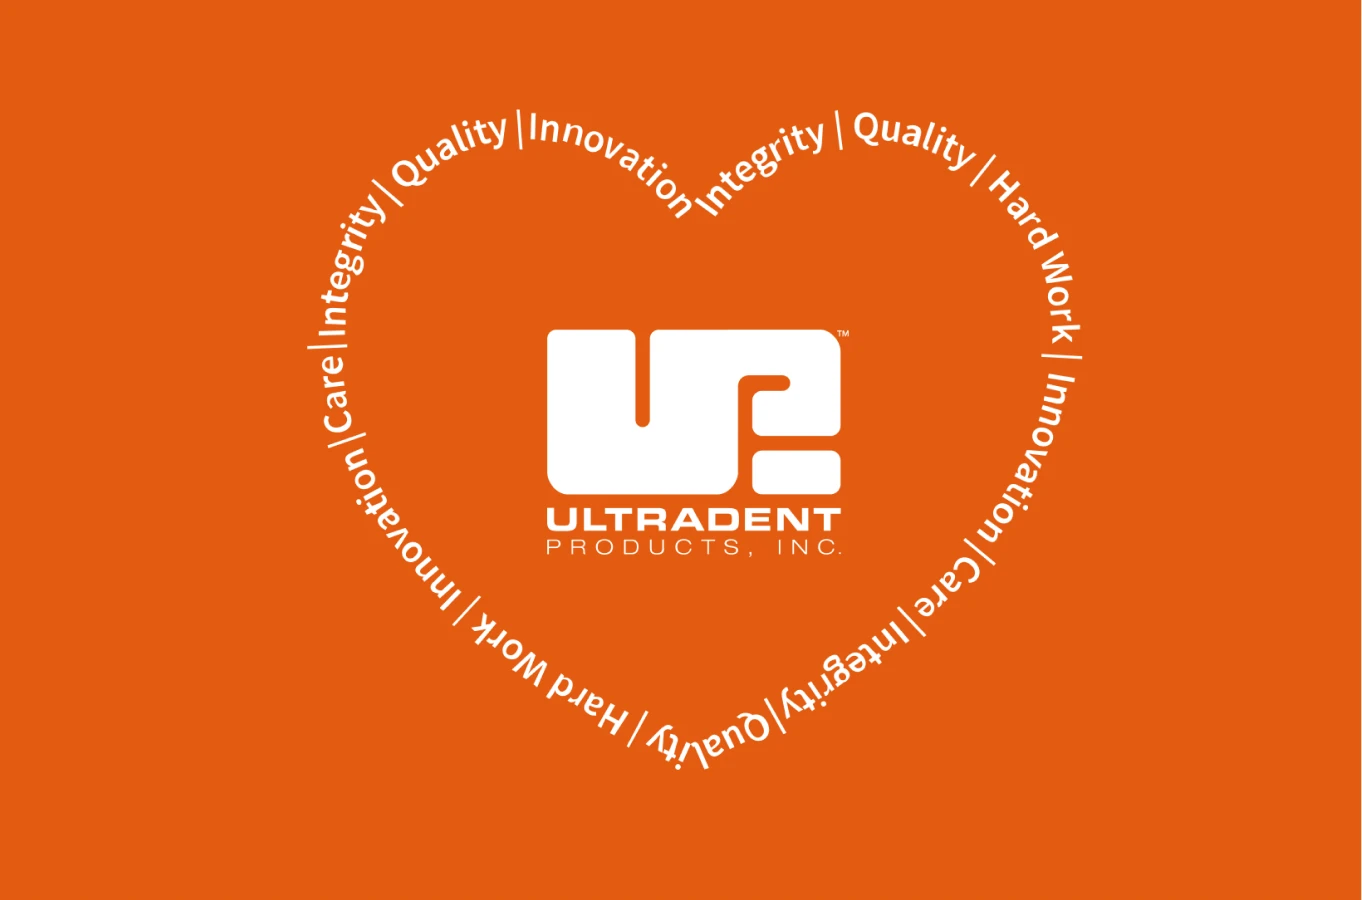 Core Values Ultradent Products, Inc.